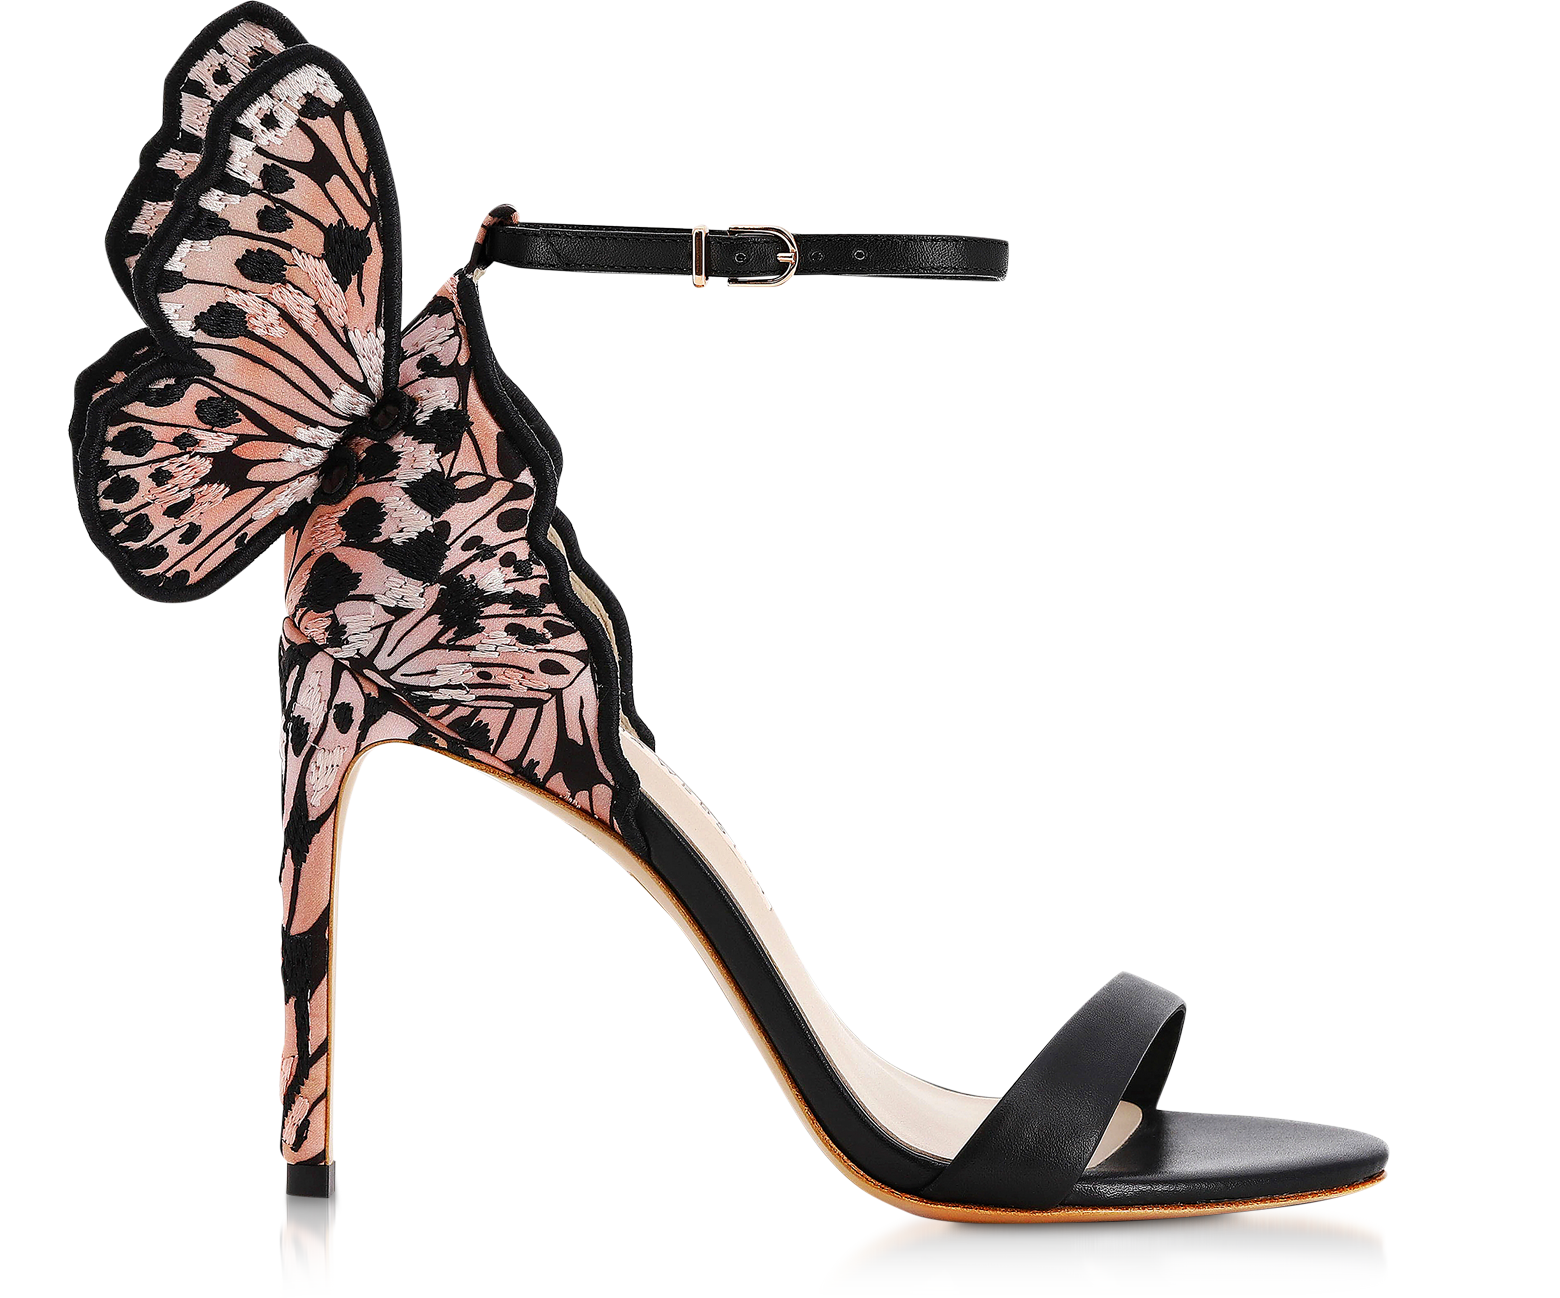 Sophia Webster Chiara Embroidery Black \u0026 Nude Silk and Leather Sandals 39  IT/EU at FORZIERI